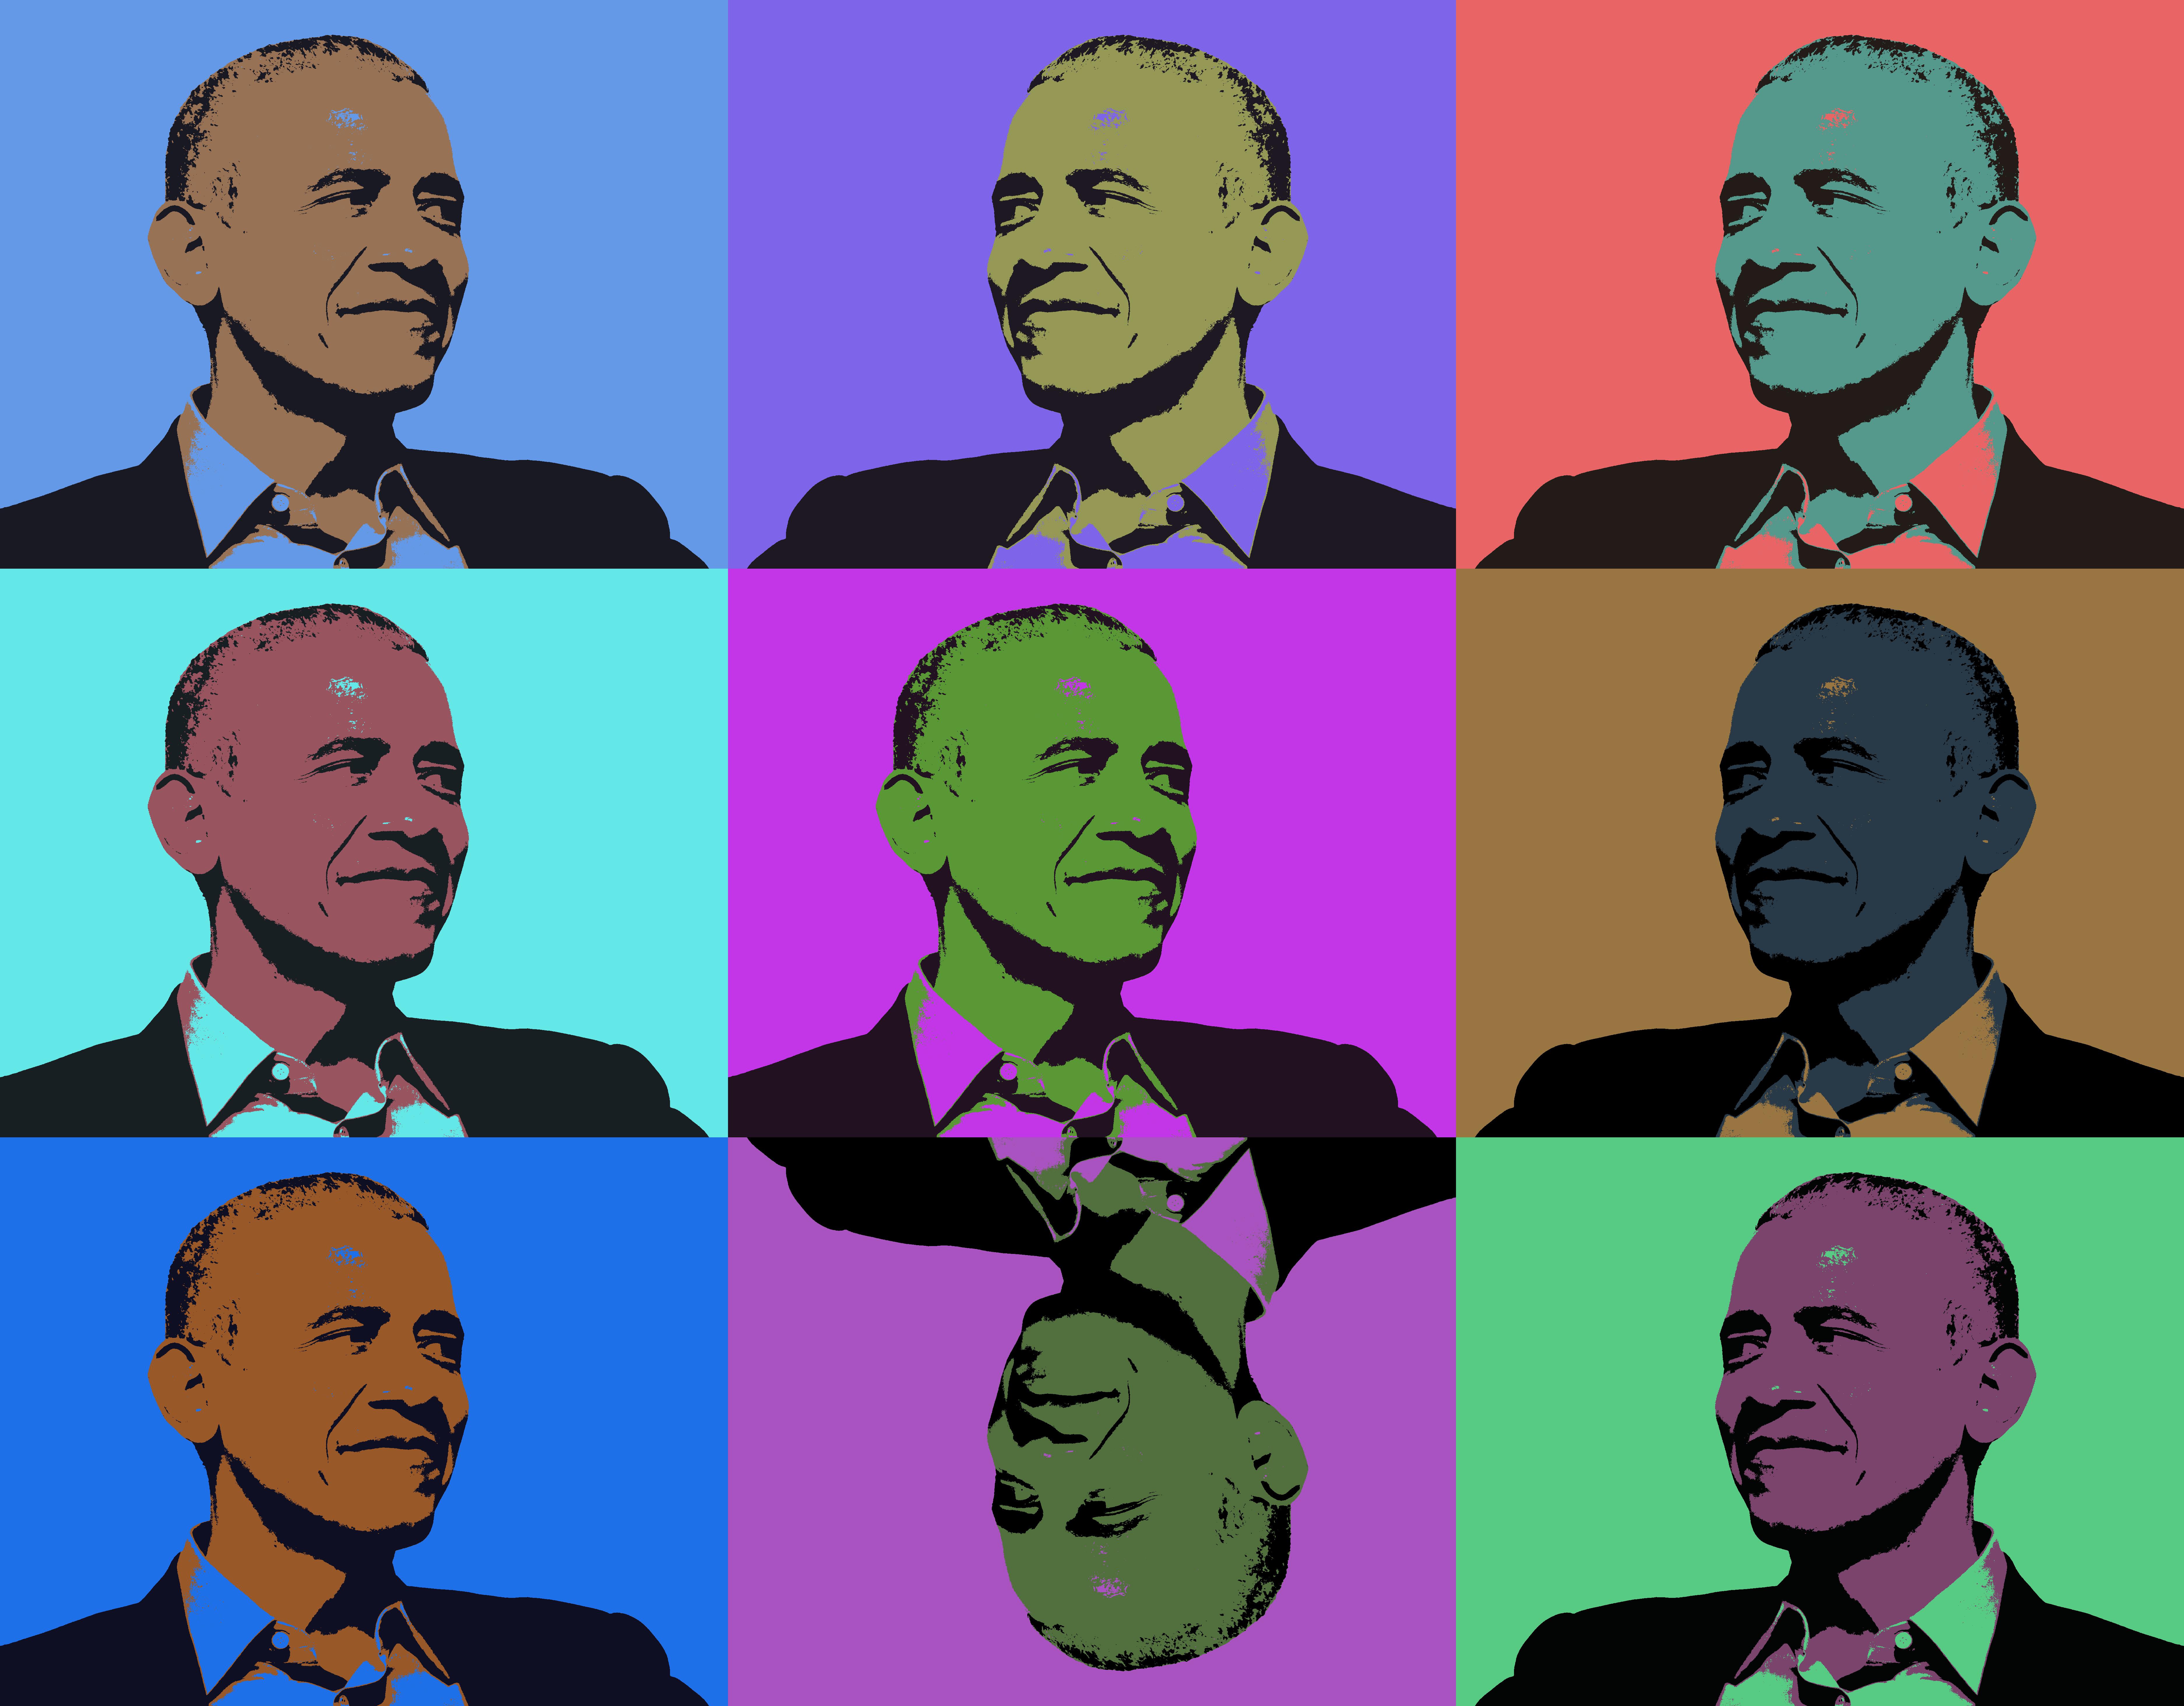 A picture of Barack Obama inspired by Andy Warhol